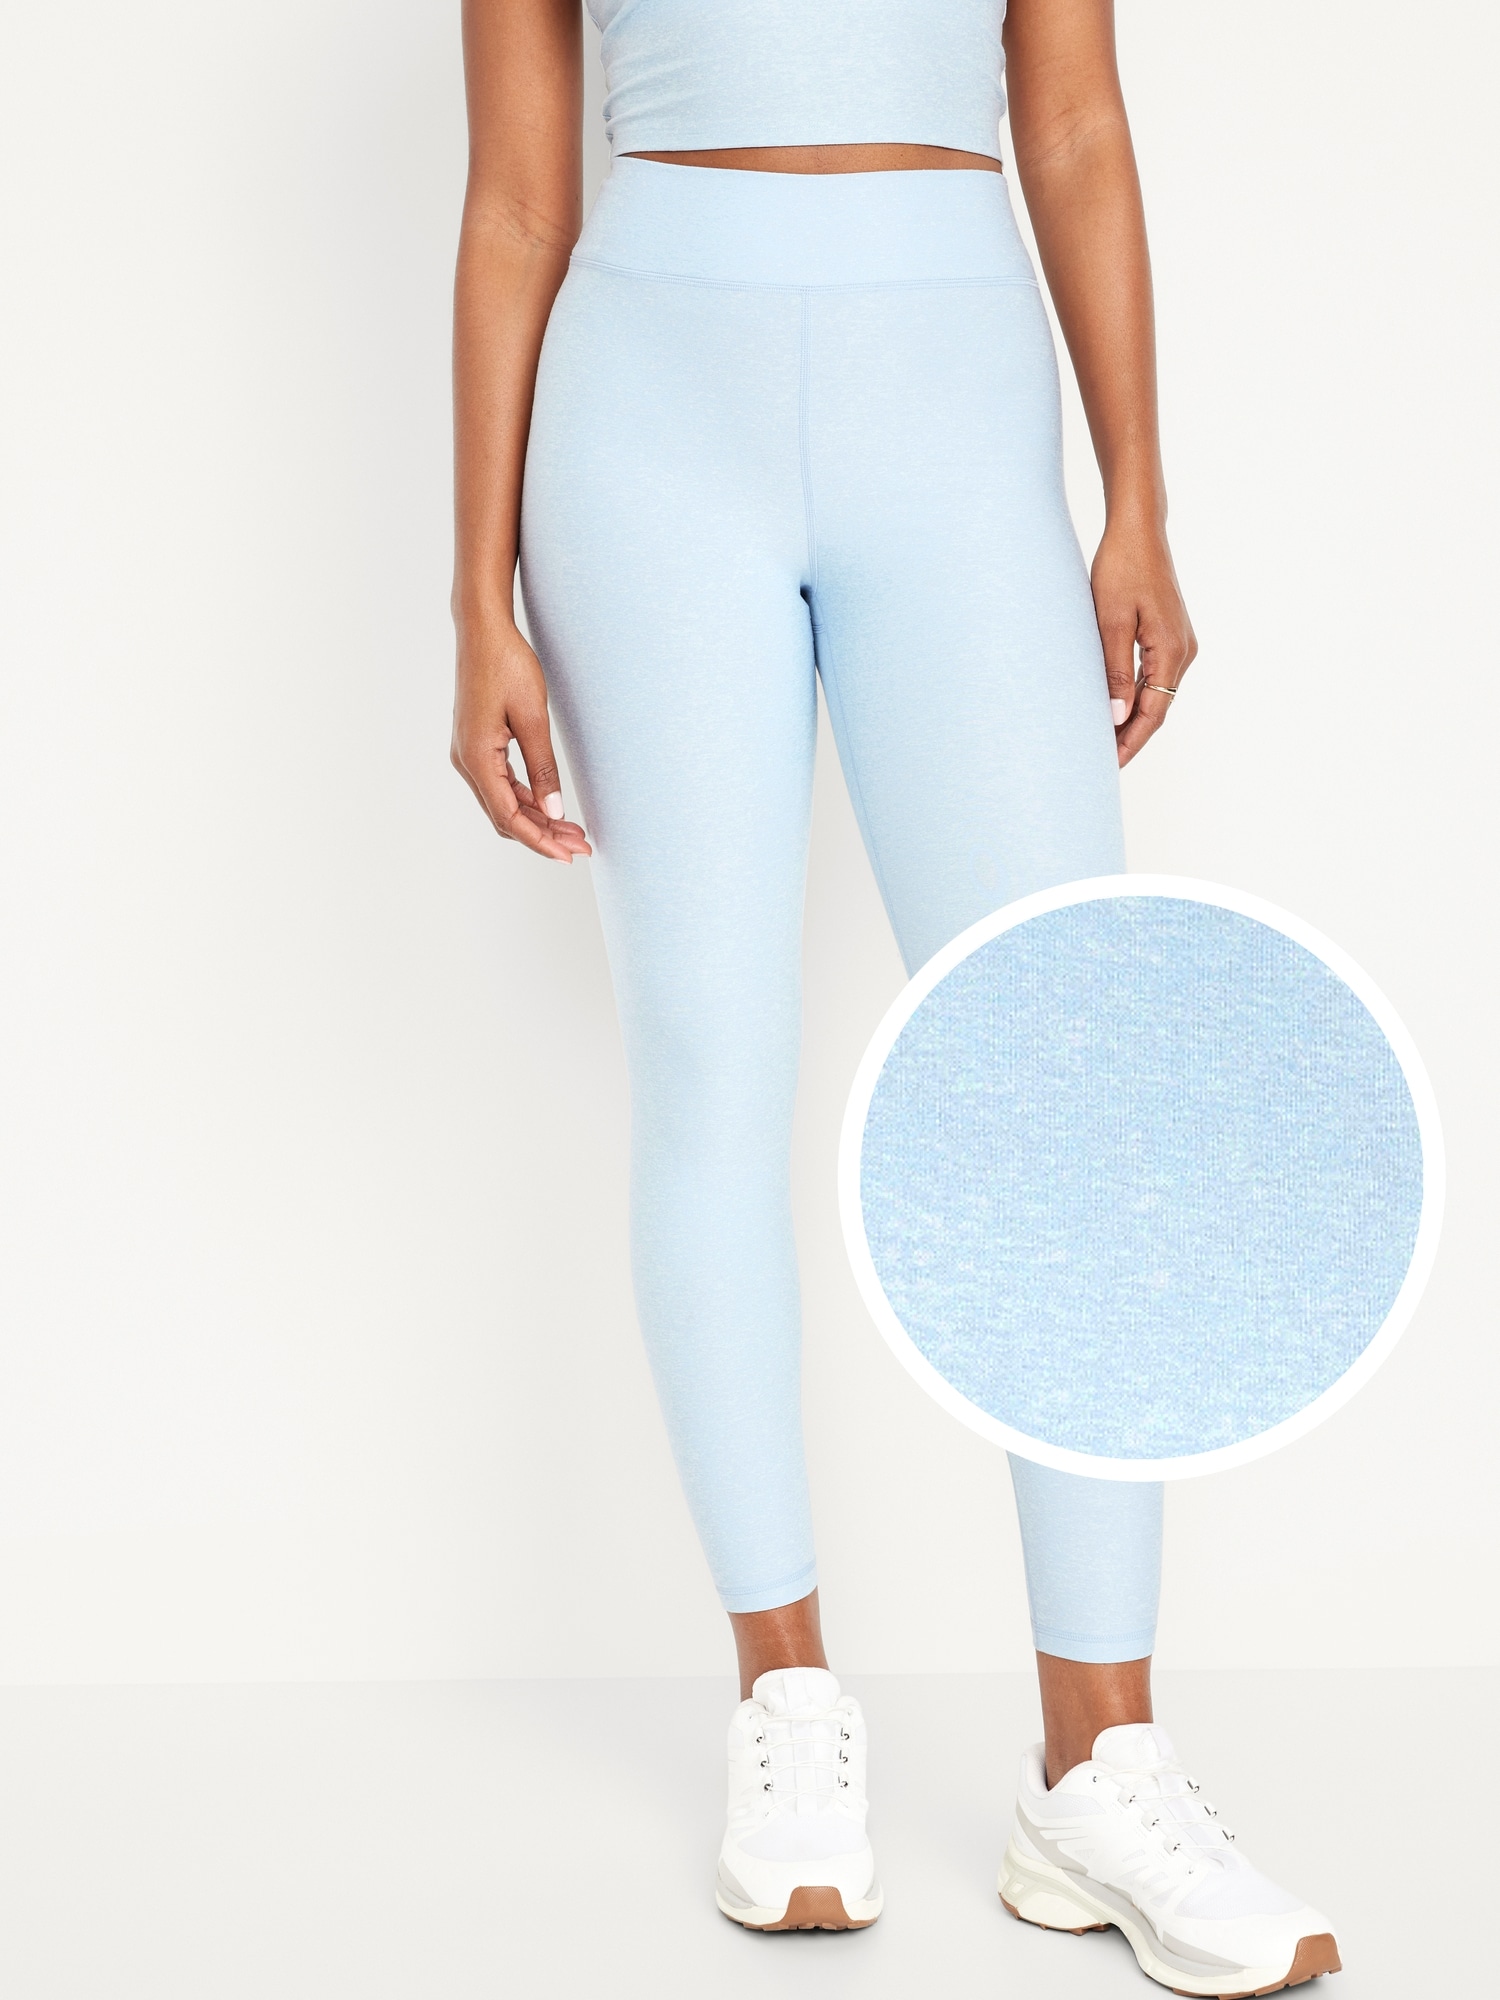 Extra High-Waisted Cloud+ 7/8 Jogger Leggings for Women, Old Navy